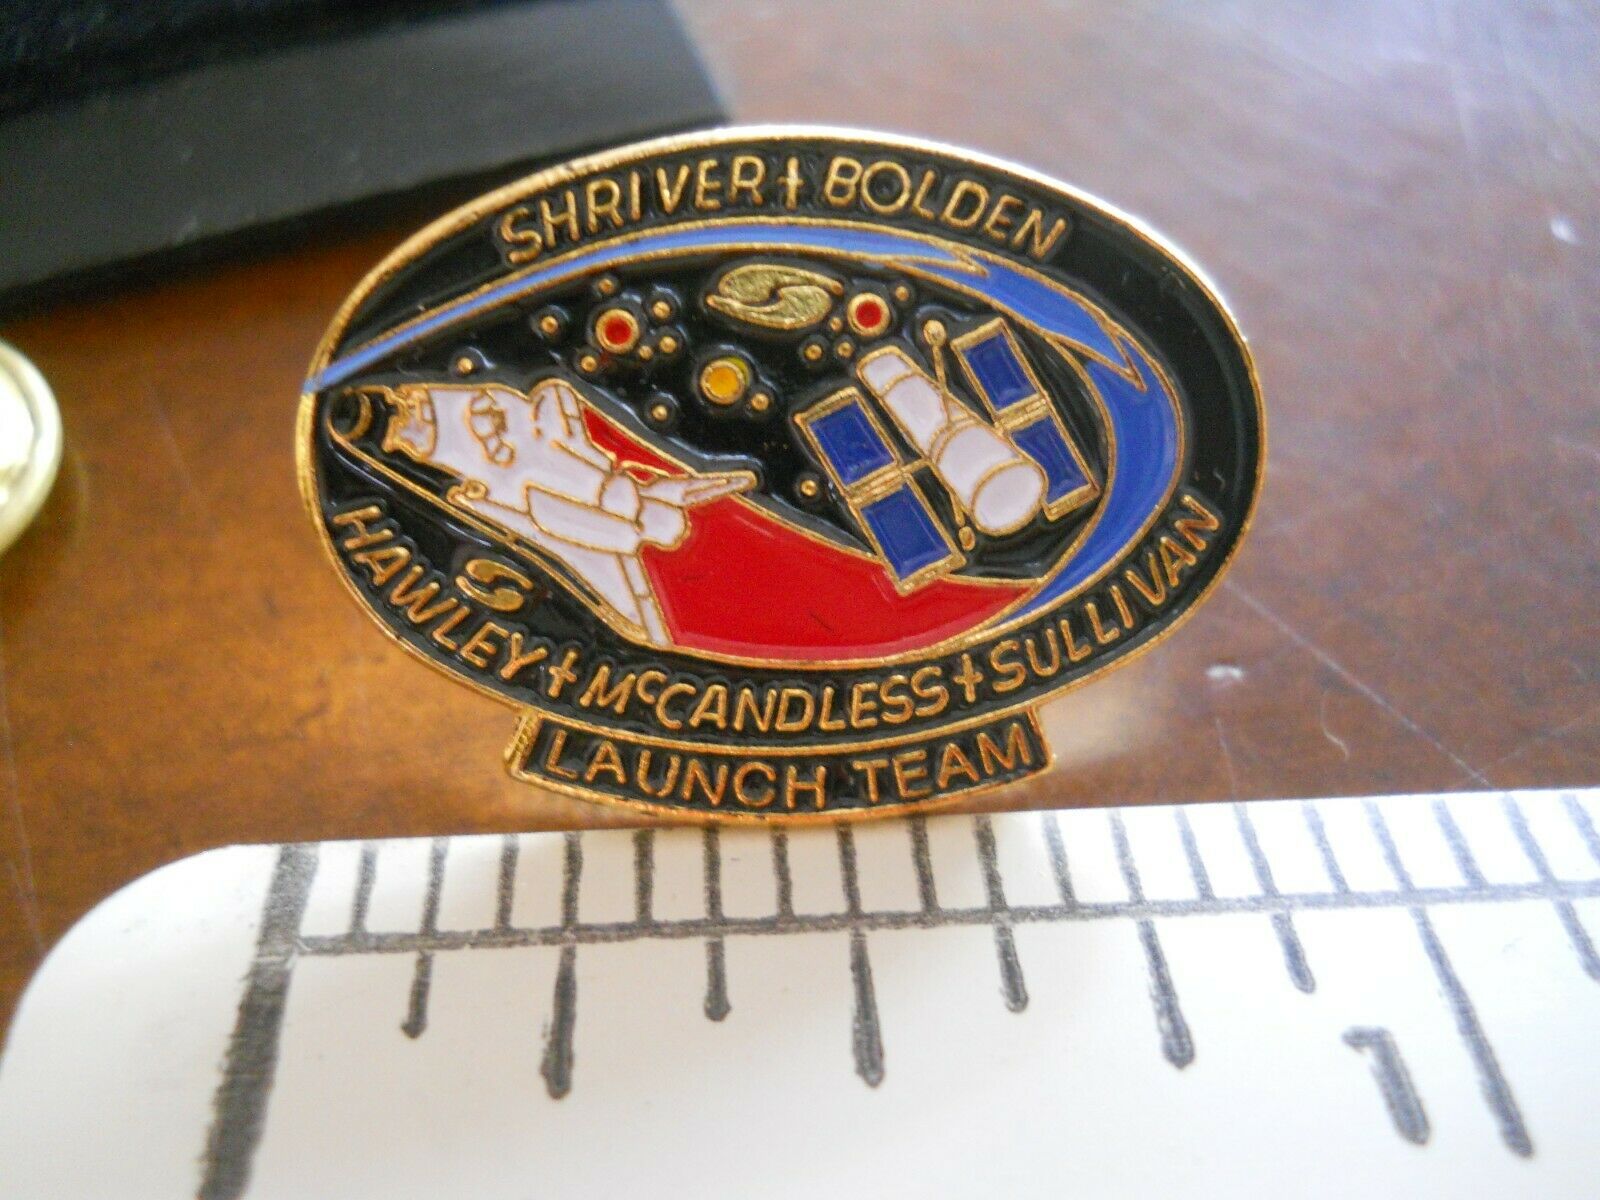 NASA SHUTTLE MISSION STS-31 LAUNCH TEAM PIN, DISCOVERY, HUBBLE LAUNCH, 1990, NEW